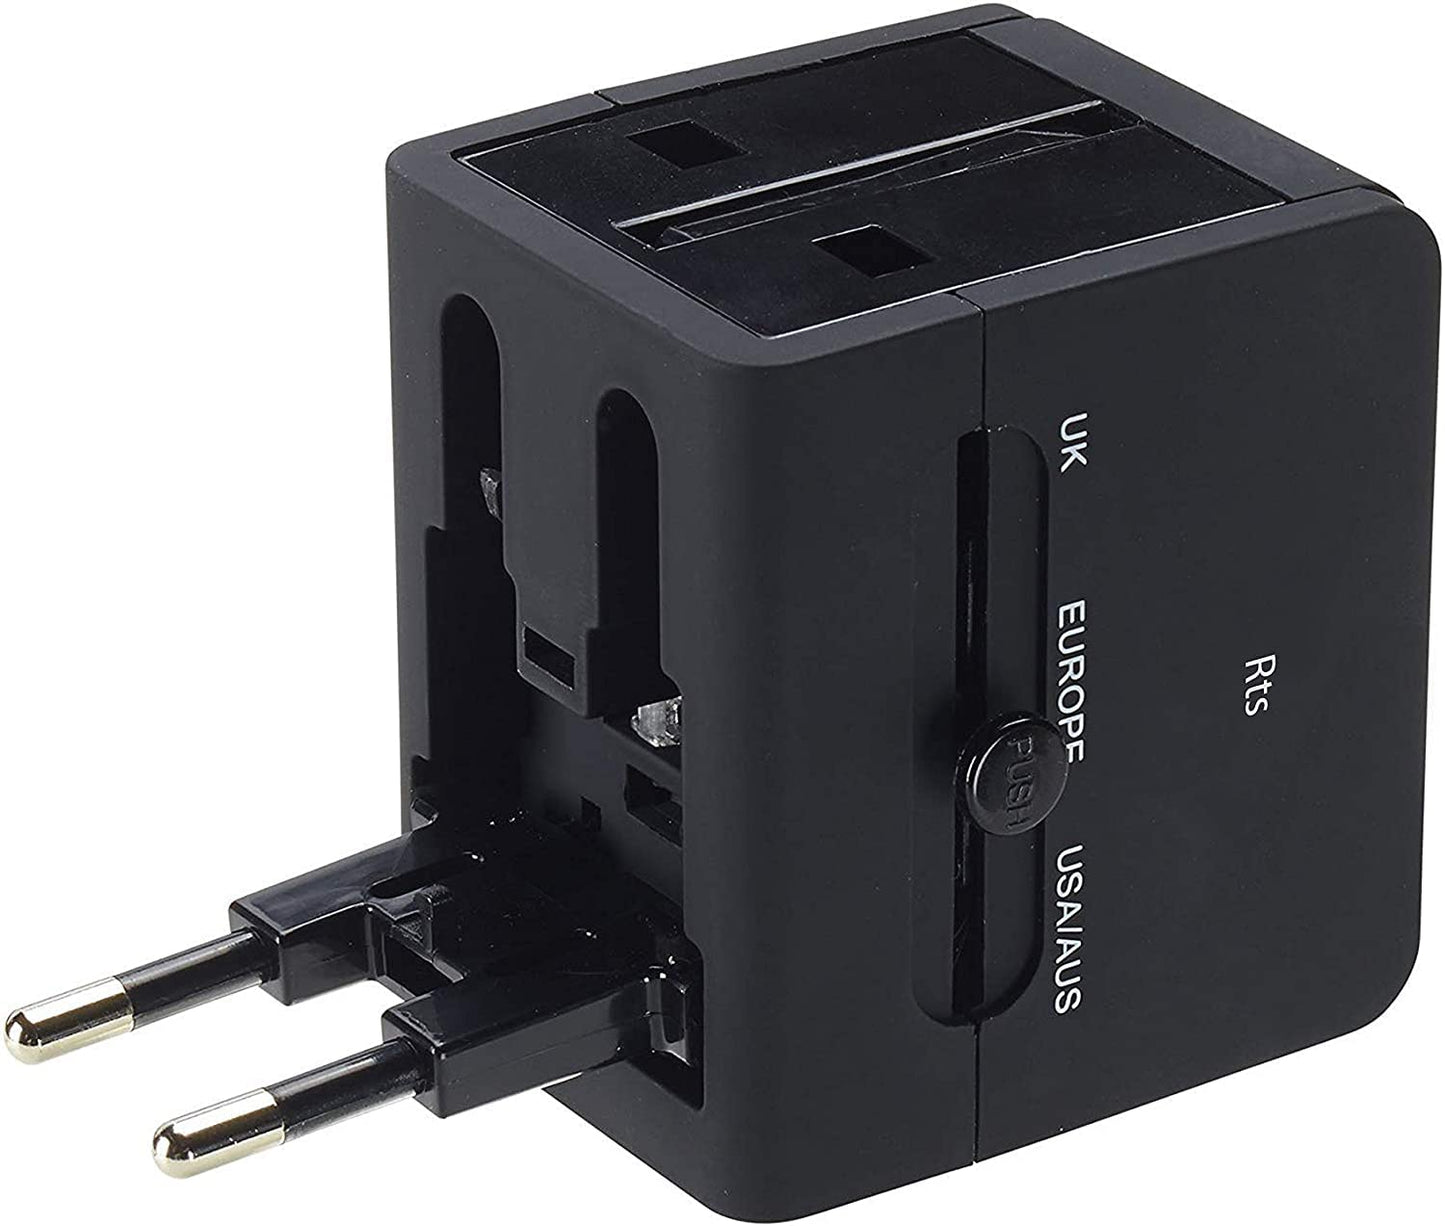 EYUVAA International Travel Adapter with Dual USB Charger Ports Worldwide Charger Power Plug for Mobile Phone, Laptop, Camera & Tablet Travelers to The US, Europe, UK & More (Black)